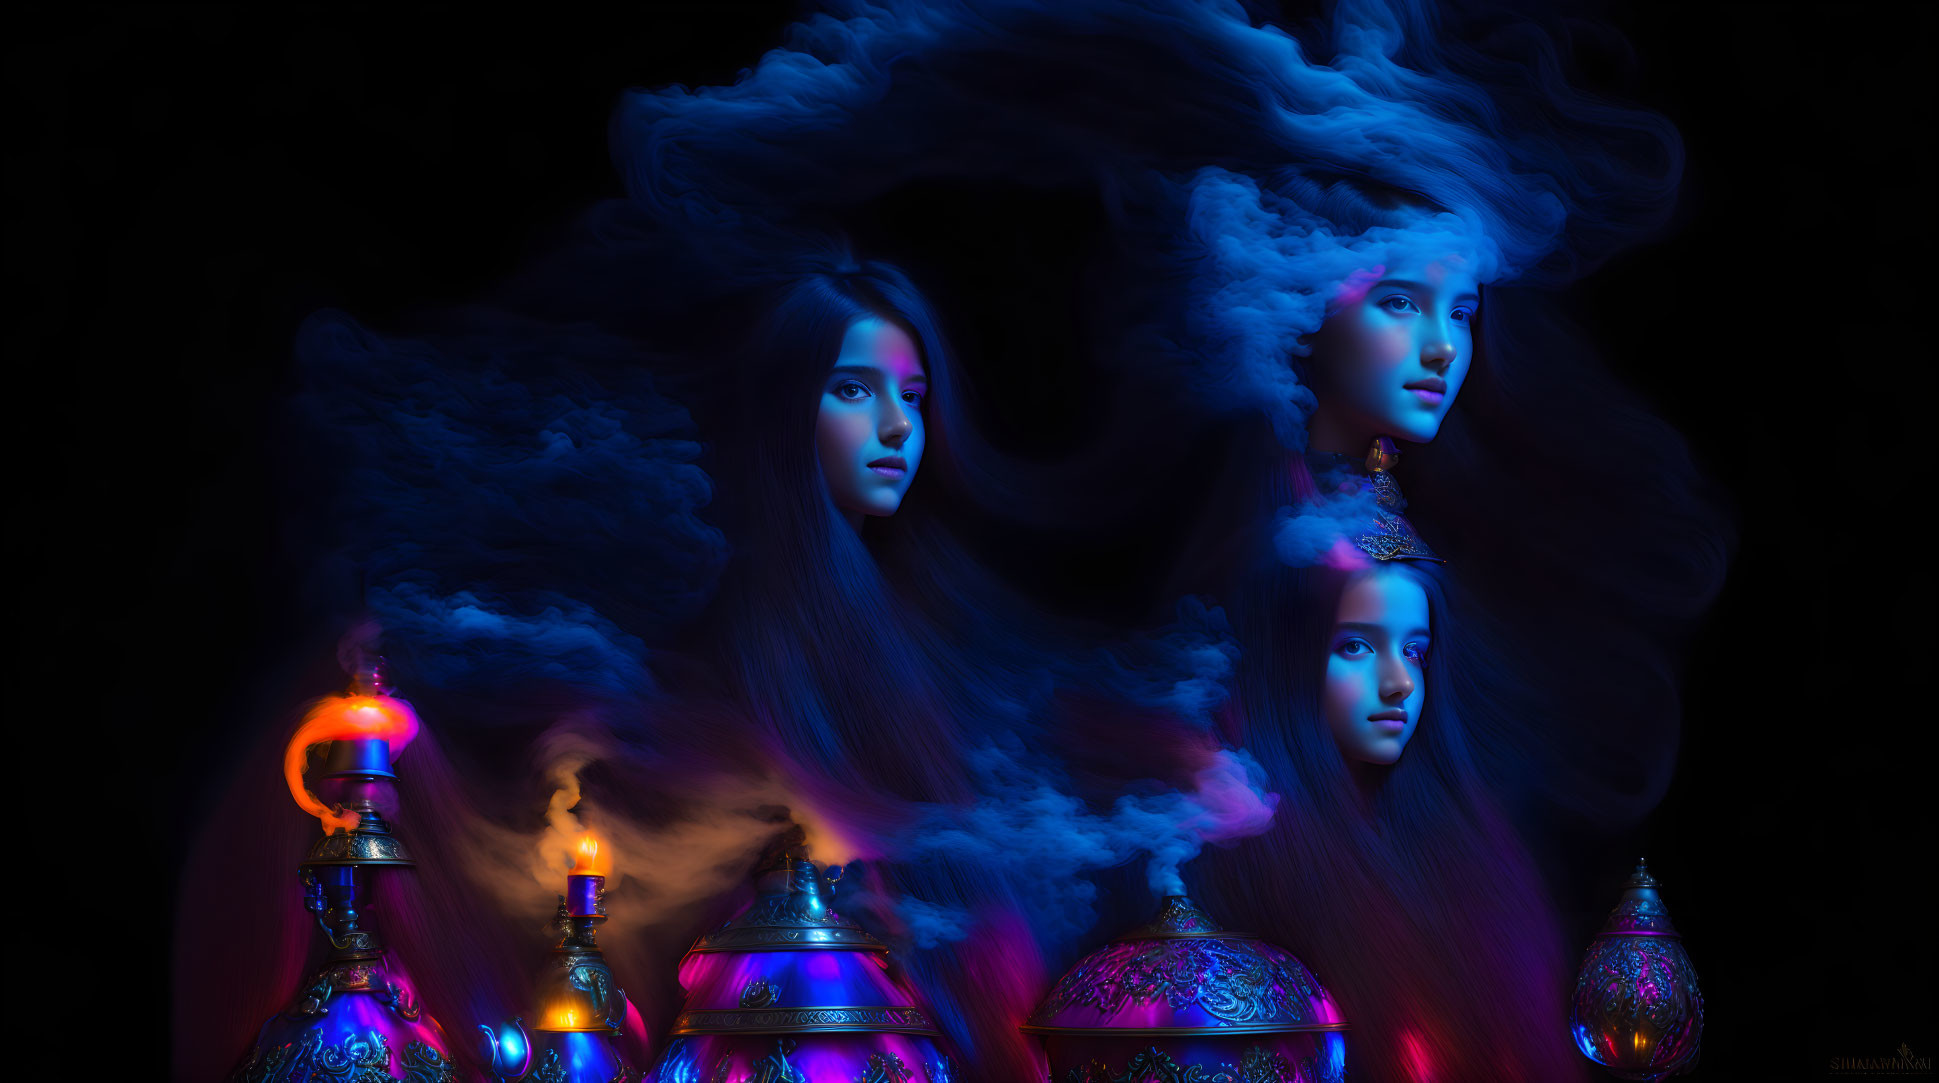 Four women's faces in mist with colorful lamps on dark background